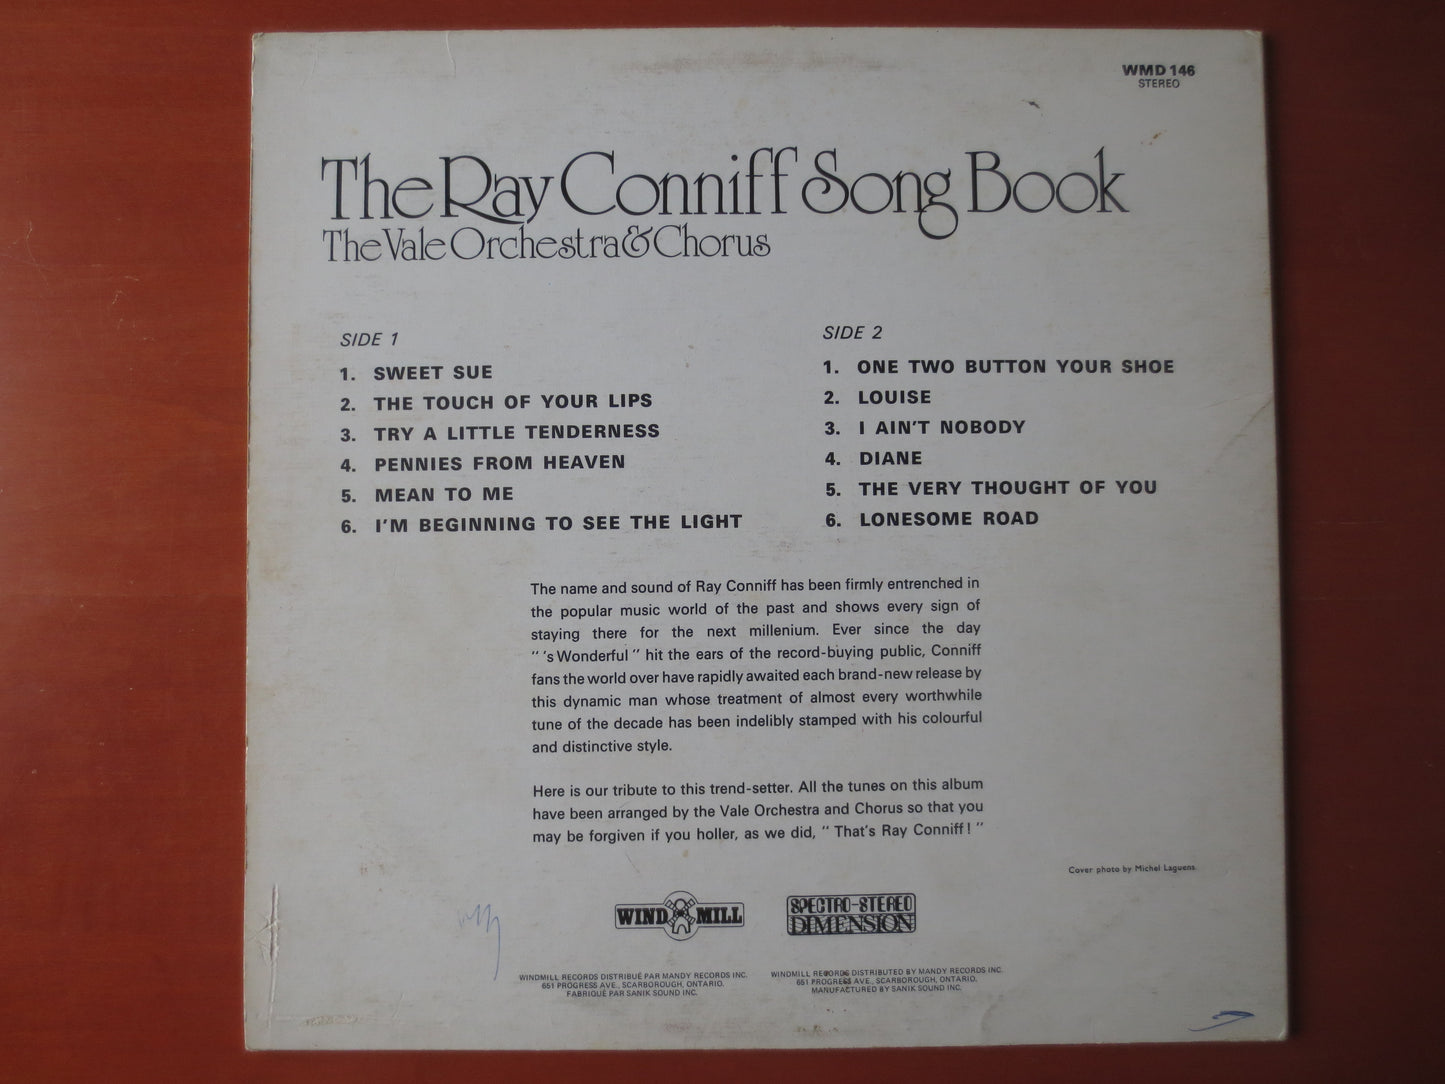 RAY CONNIFF SONG Book, Vale Orchestra, Ray Conniff Records, Ray Conniff Albums, Jazz Albums, Vinyl Record, Lp, 1972 Records